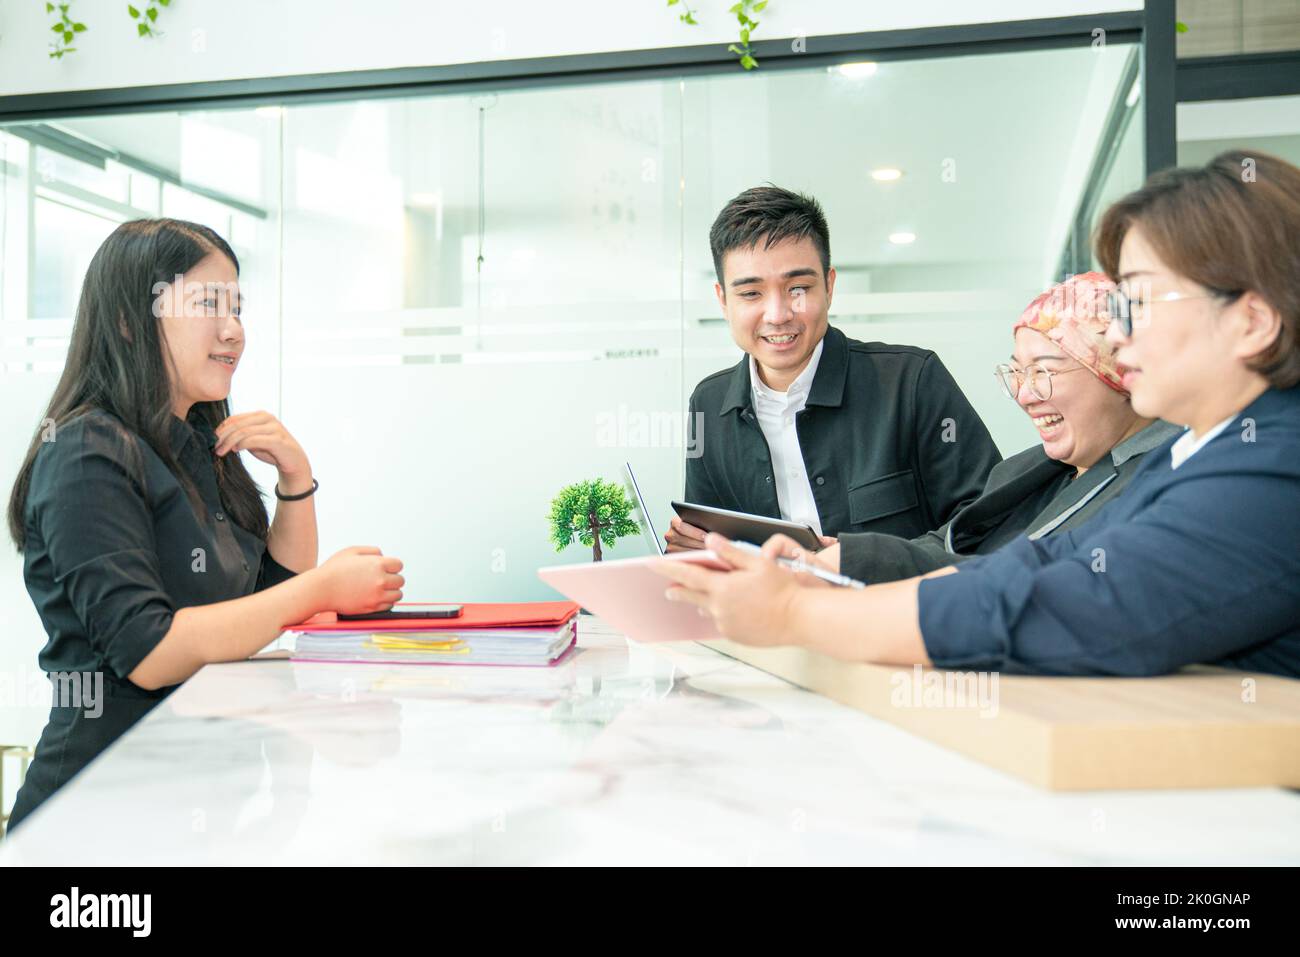 Friendly colleagues work team working together, laughing with positive emotions in the office. Stock Photo